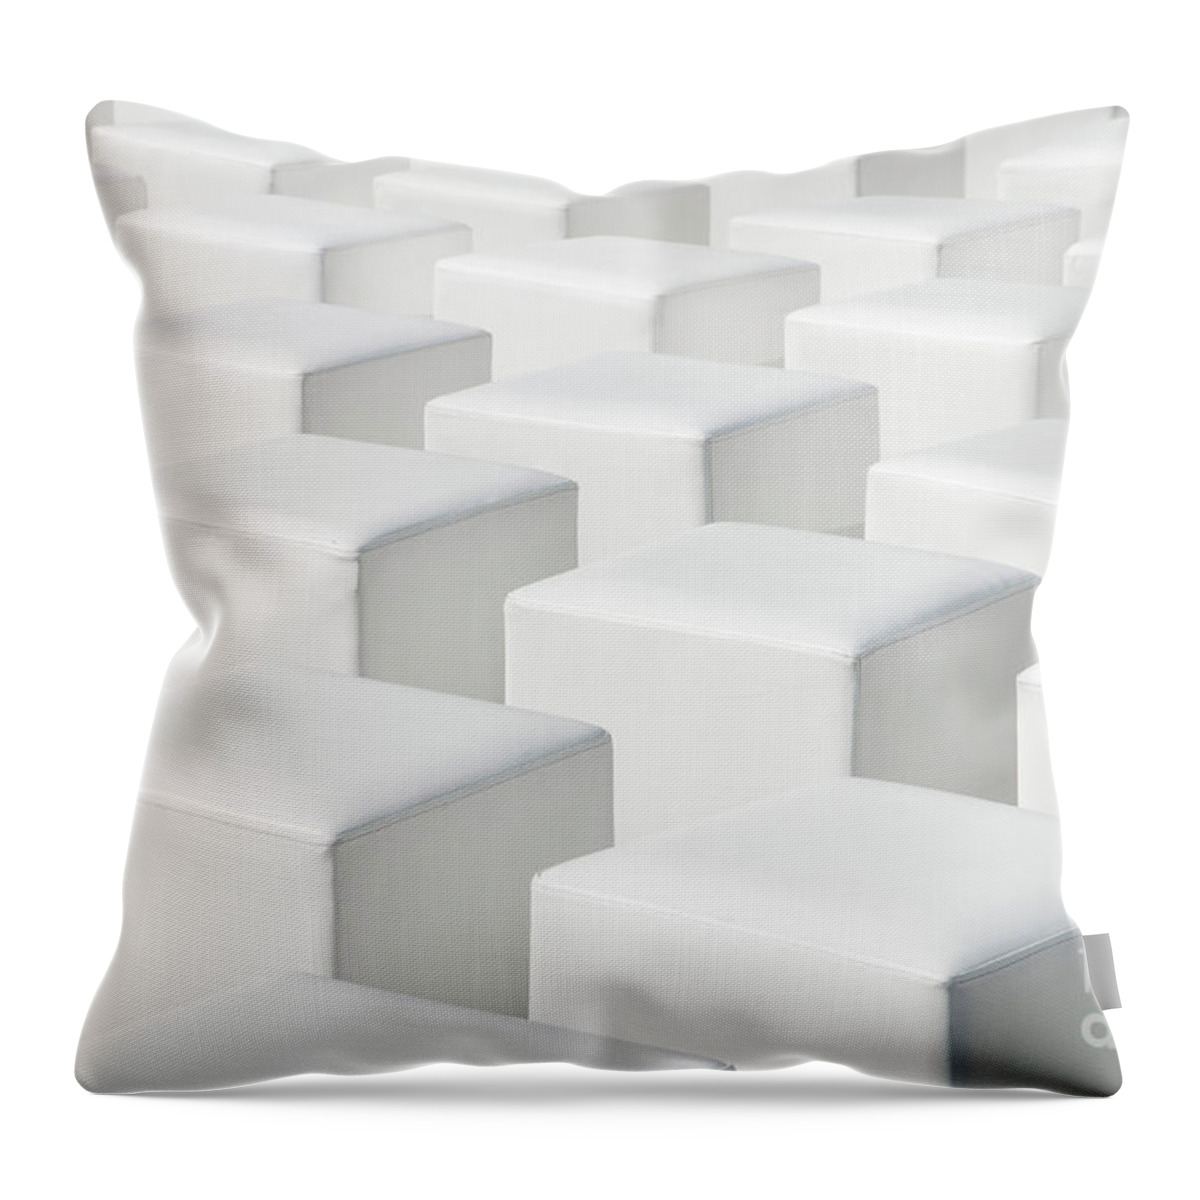 Perspective Throw Pillow featuring the photograph Perspective white geometric cube outdoor chairs background by Yanin Kongurai